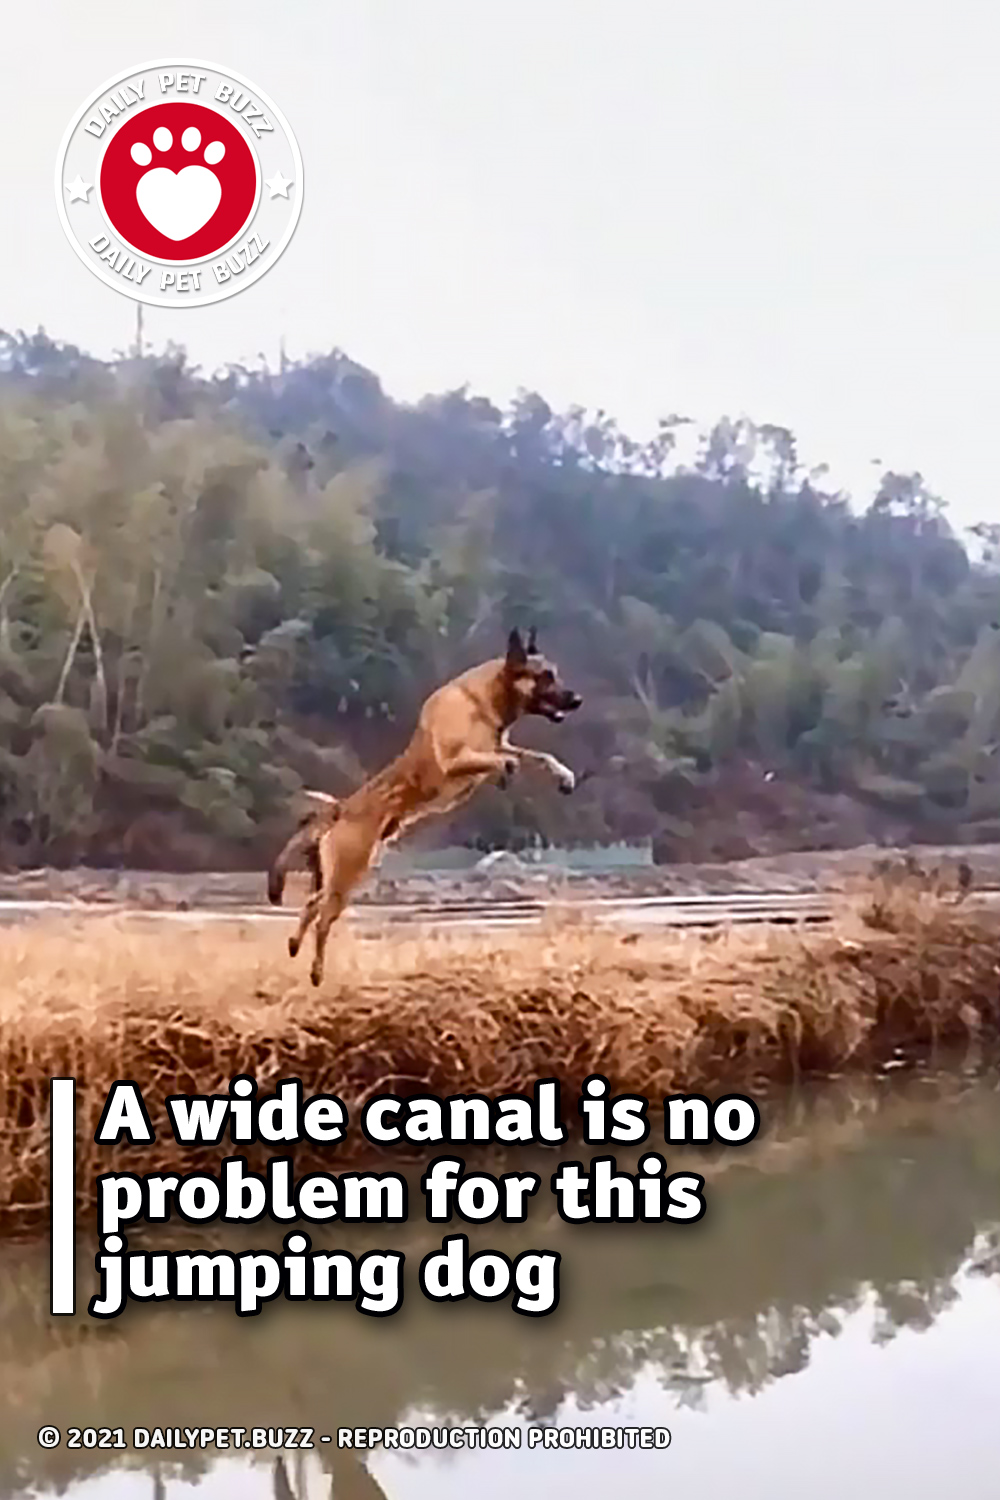 A wide canal is no problem for this jumping dog